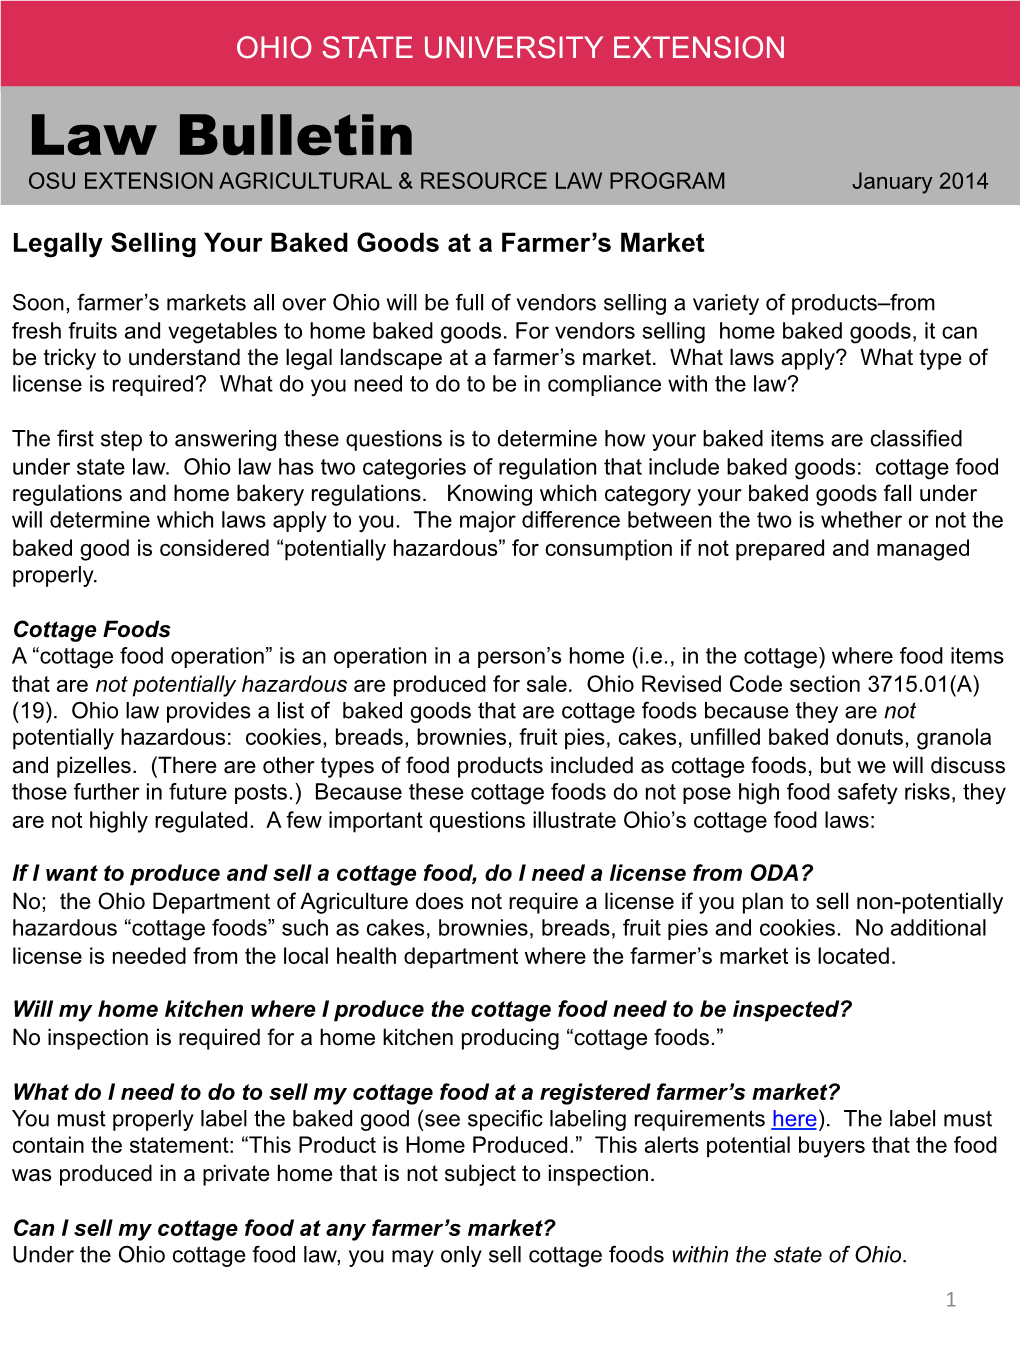 Legally Selling Your Baked Goods at a Farmer's Market